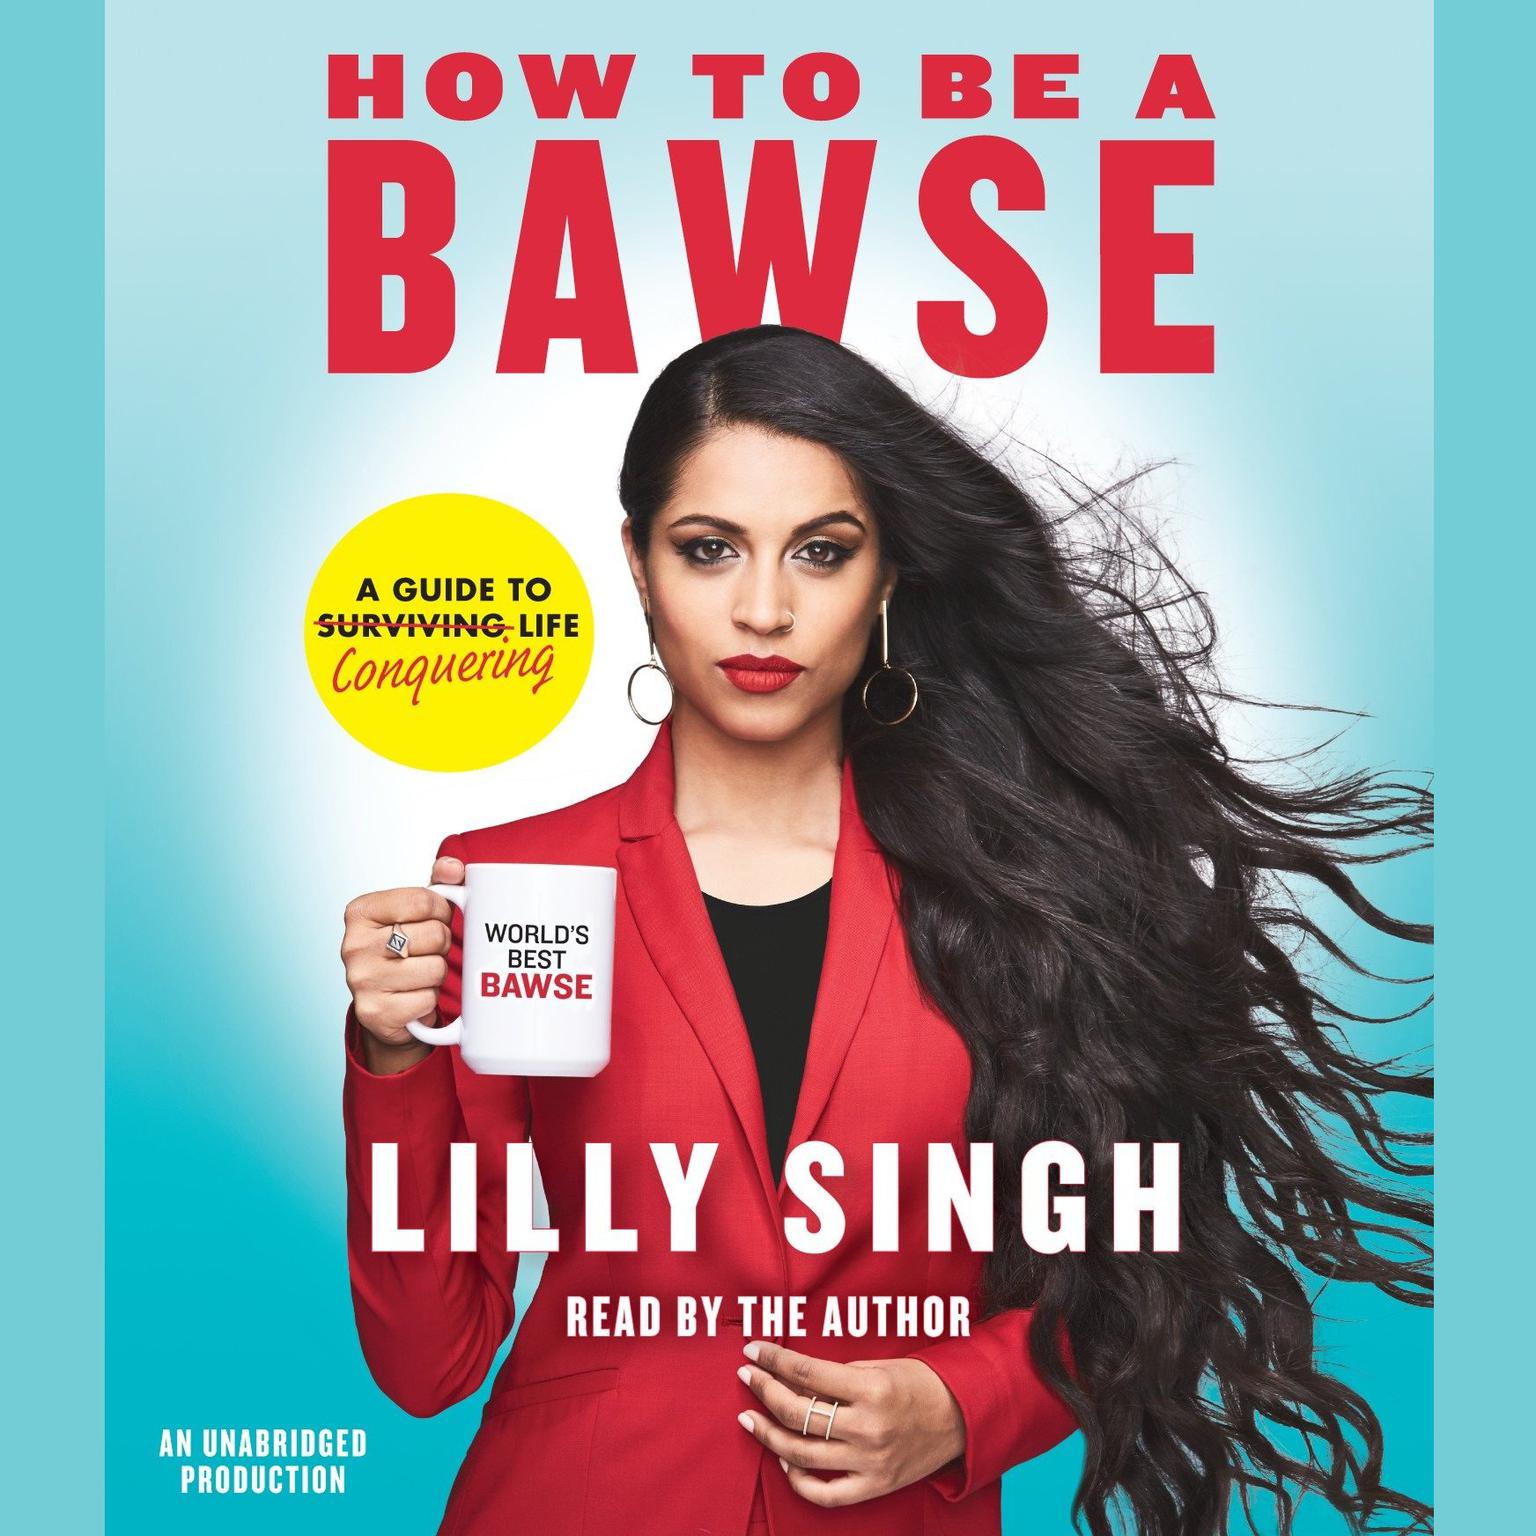 How to Be a Bawse: A Guide to Conquering Life Audiobook, by Lilly Singh